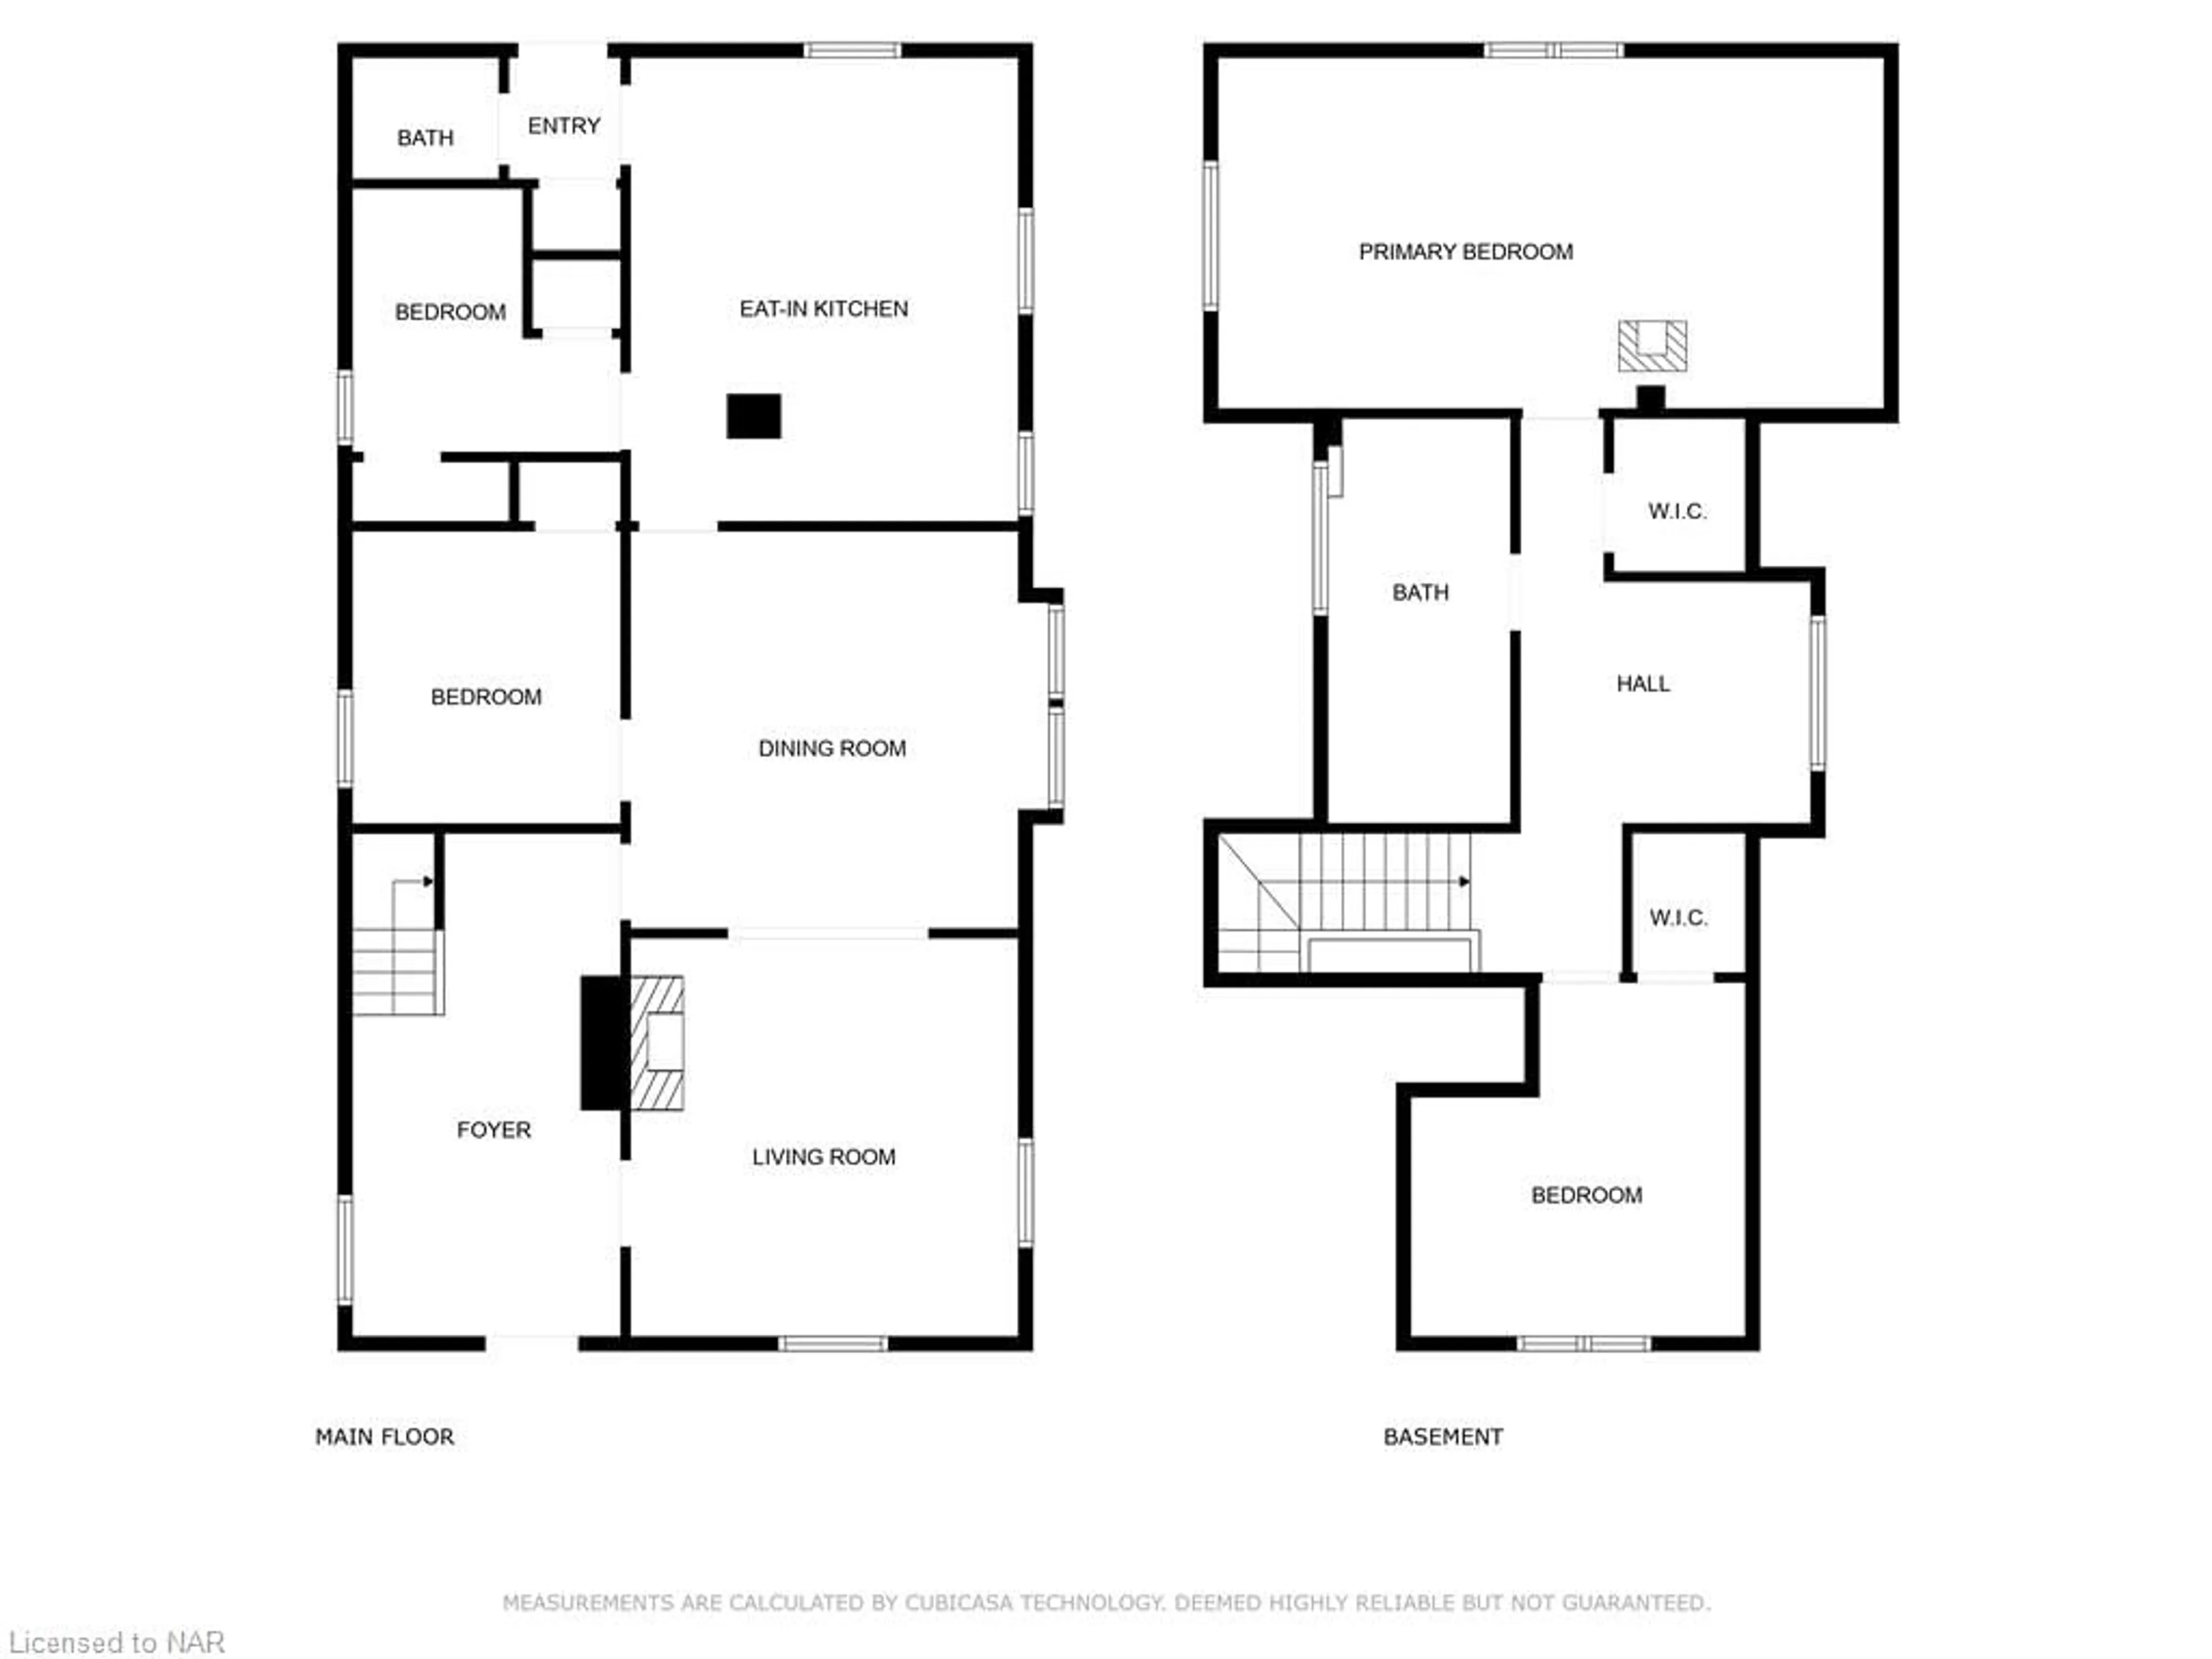 Floor plan for 305 Victoria St St, Niagara-on-the-Lake Ontario L0S 1J0